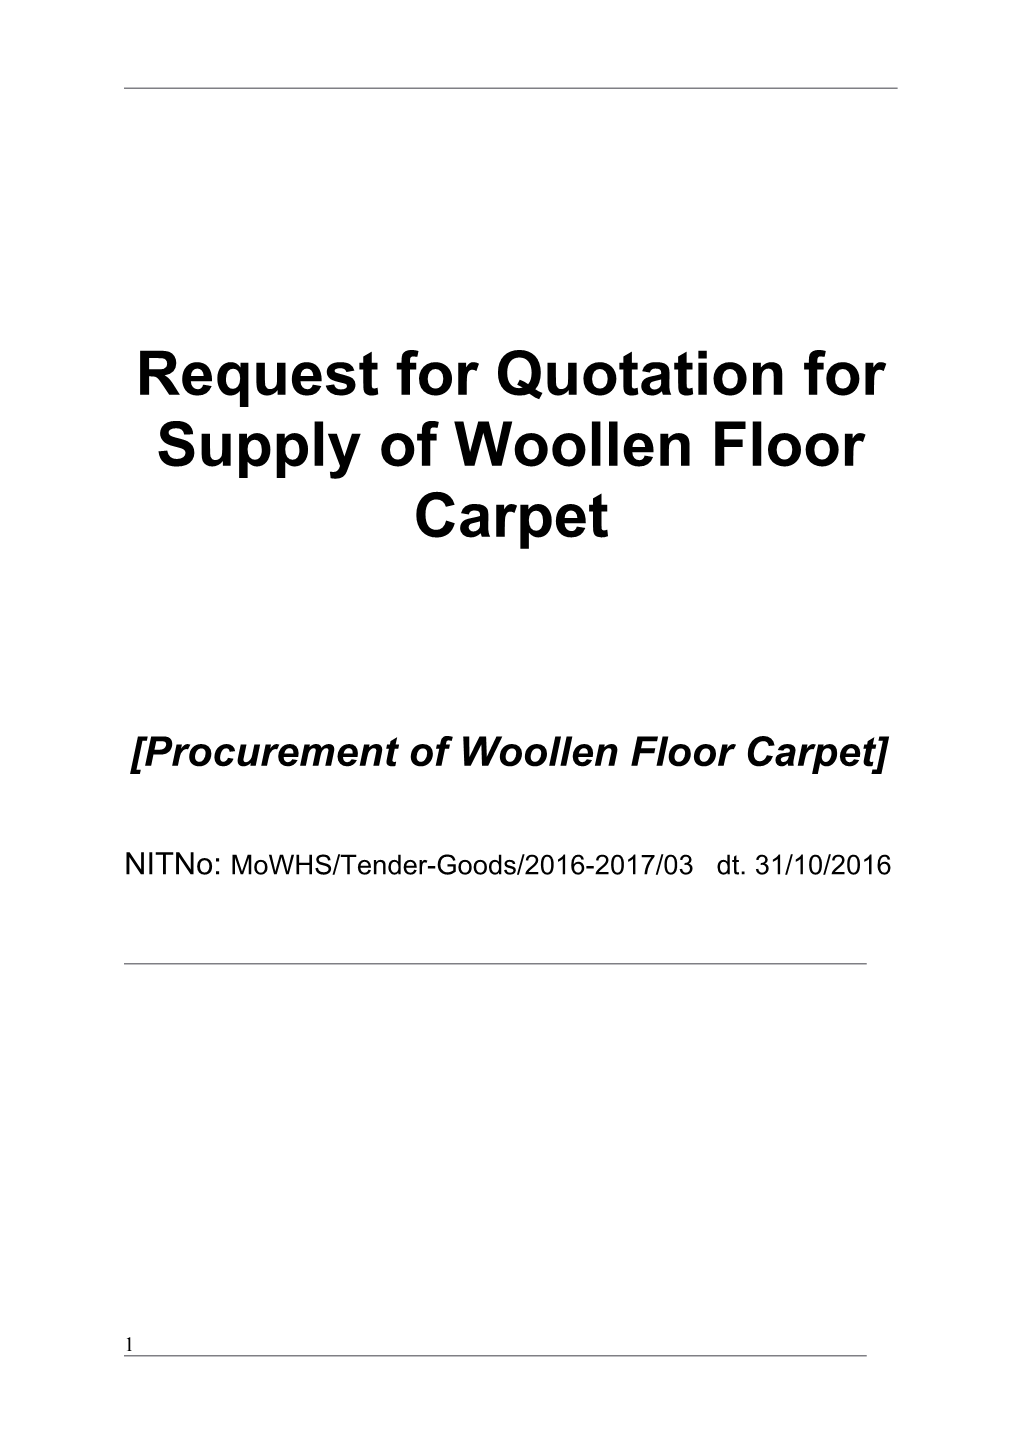 Request for Quotation for Supply of Woollen Floor Carpet